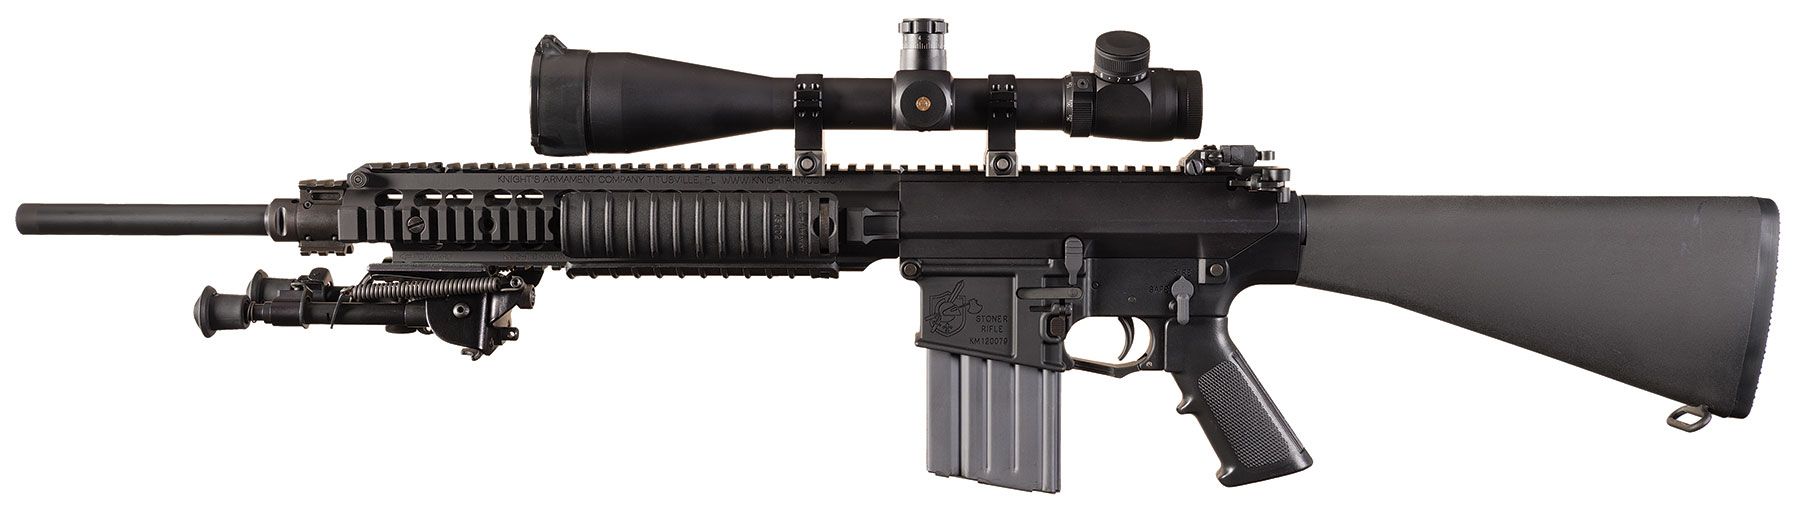 Knight's Manufacturing Co. SR-25 Semi-Automatic Rifle with Scope.